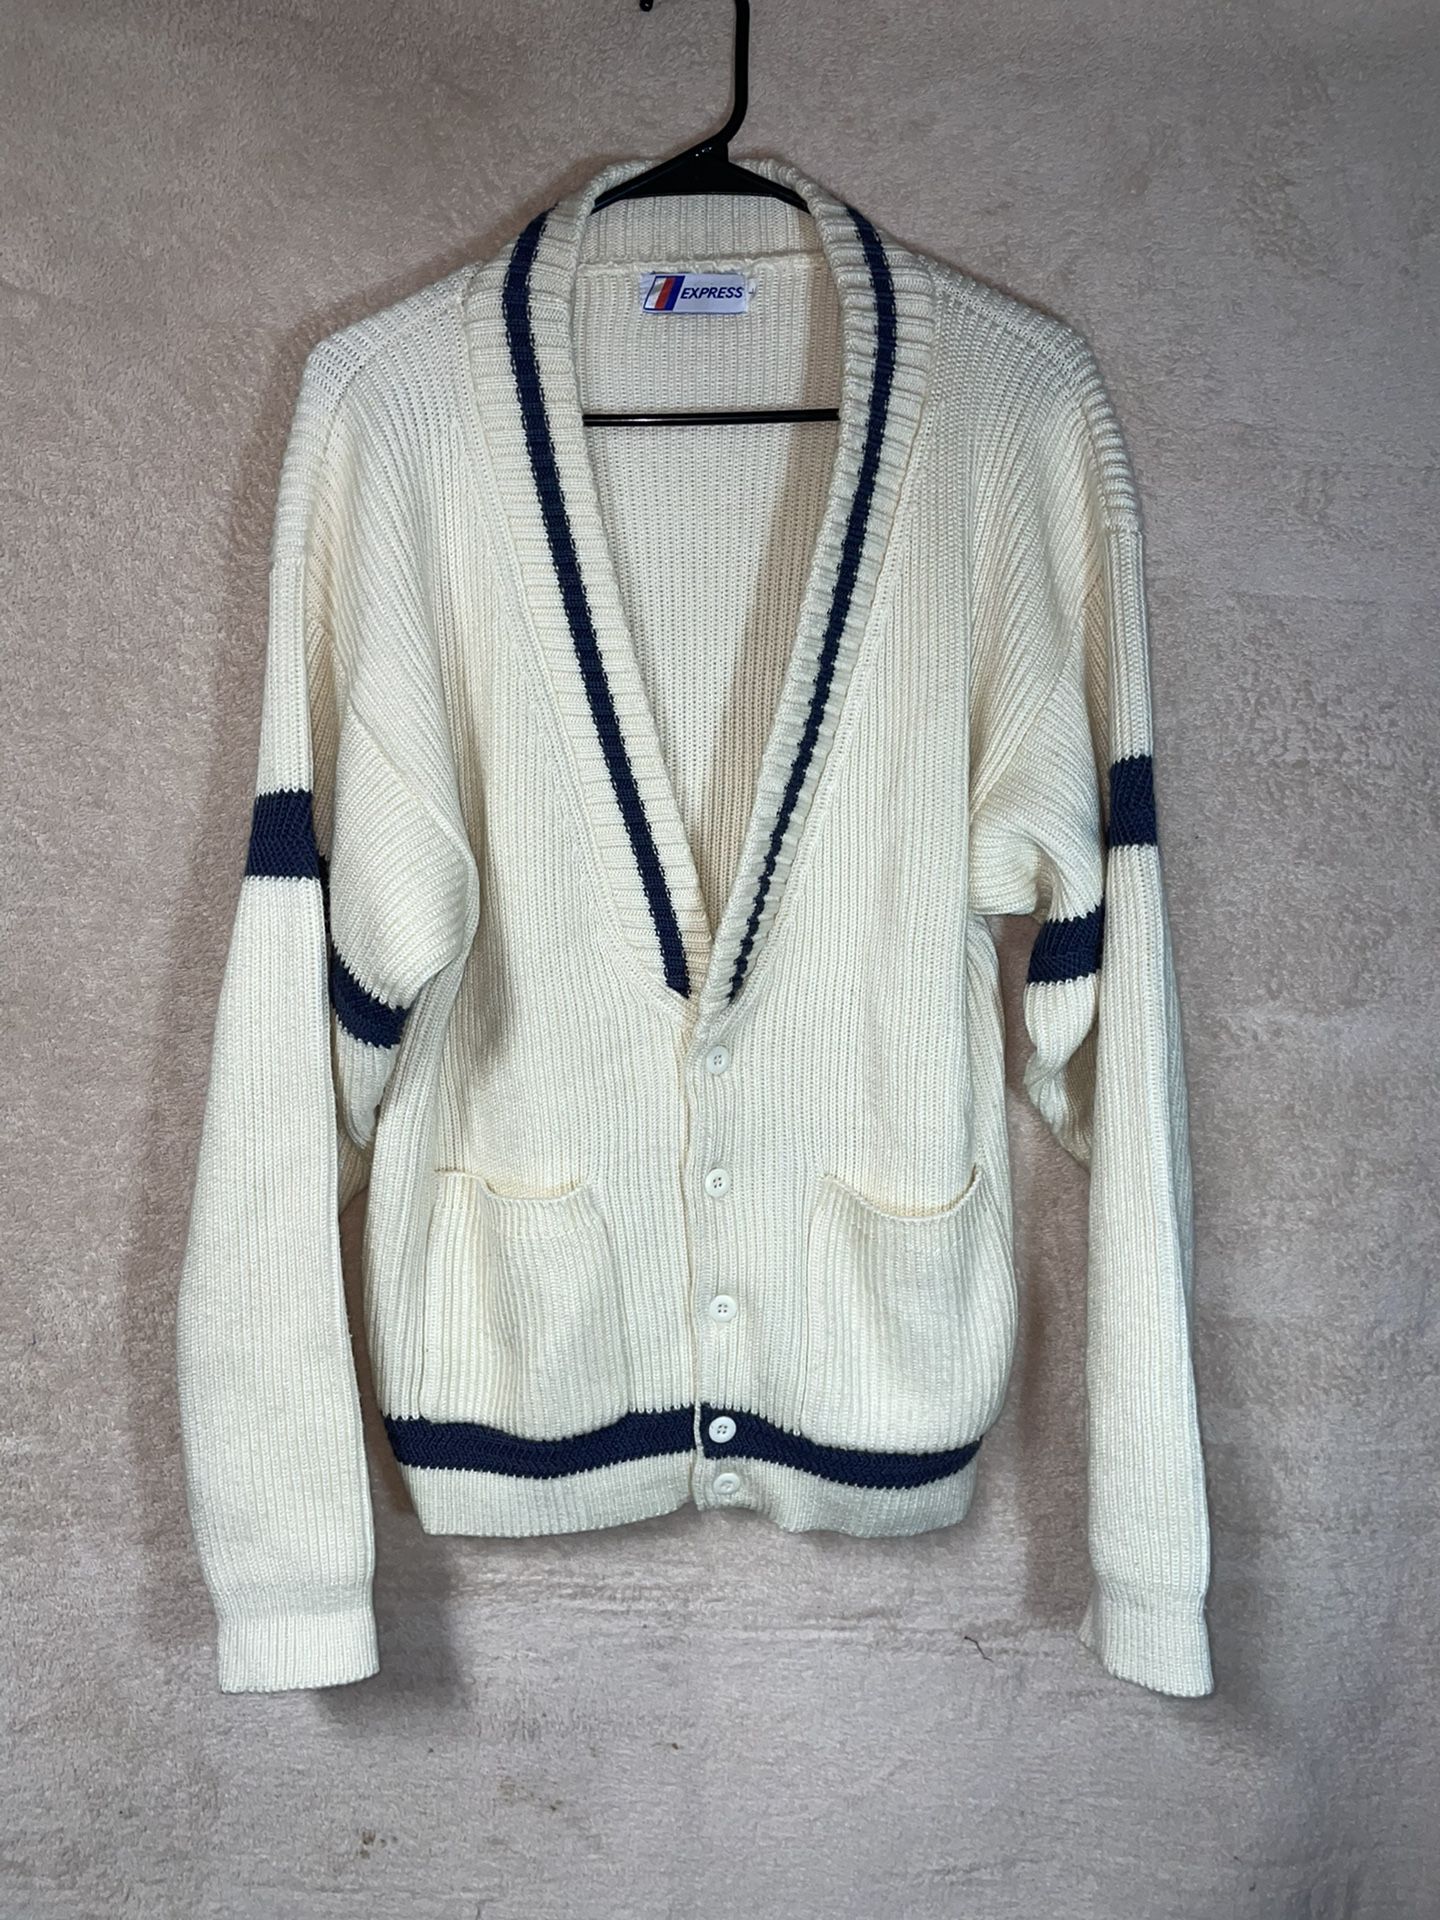 VTG 70’s Express Knitted Cardigan 